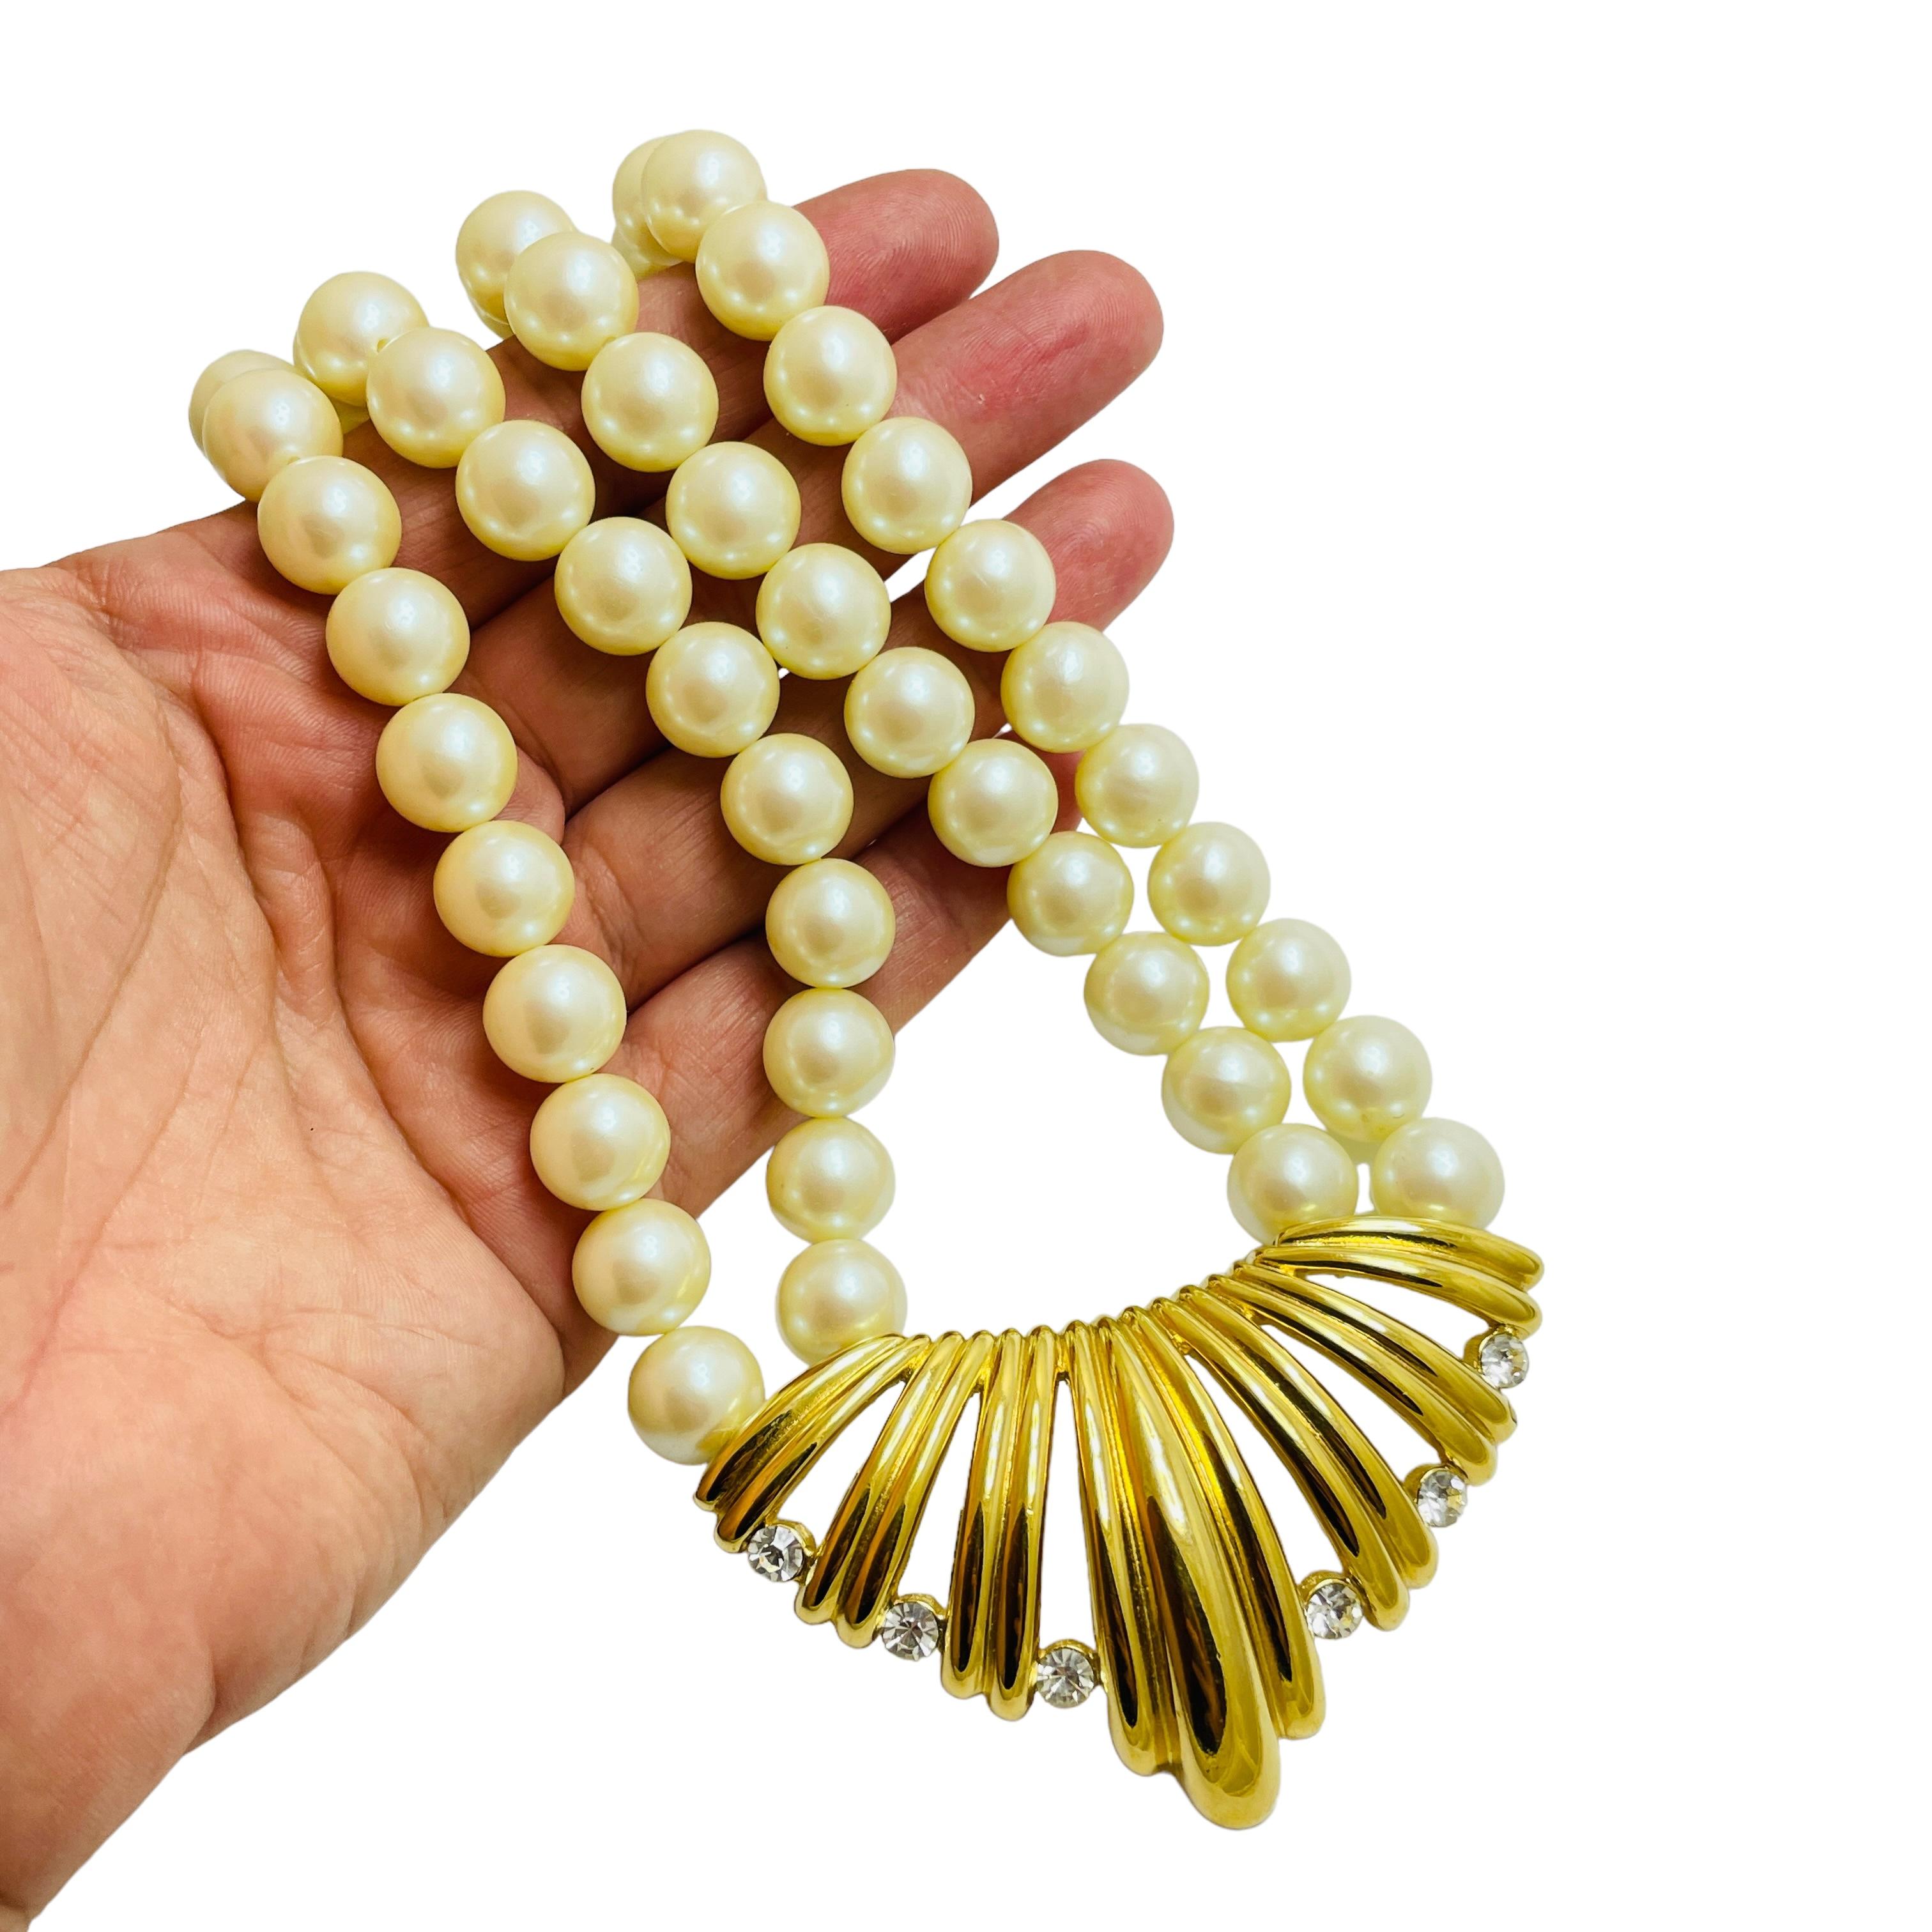 DETAILS

• signed AVON

• gold tone with rhinestones and faux pearls 

• vintage designer runway necklace

MEASUREMENTS

• 

CONDITION

• excellent vintage condition with minimal signs of wear

❤️❤️ VINTAGE DESIGNER JEWELRY ❤️❤️
❤️❤️ ALEXANDER'S